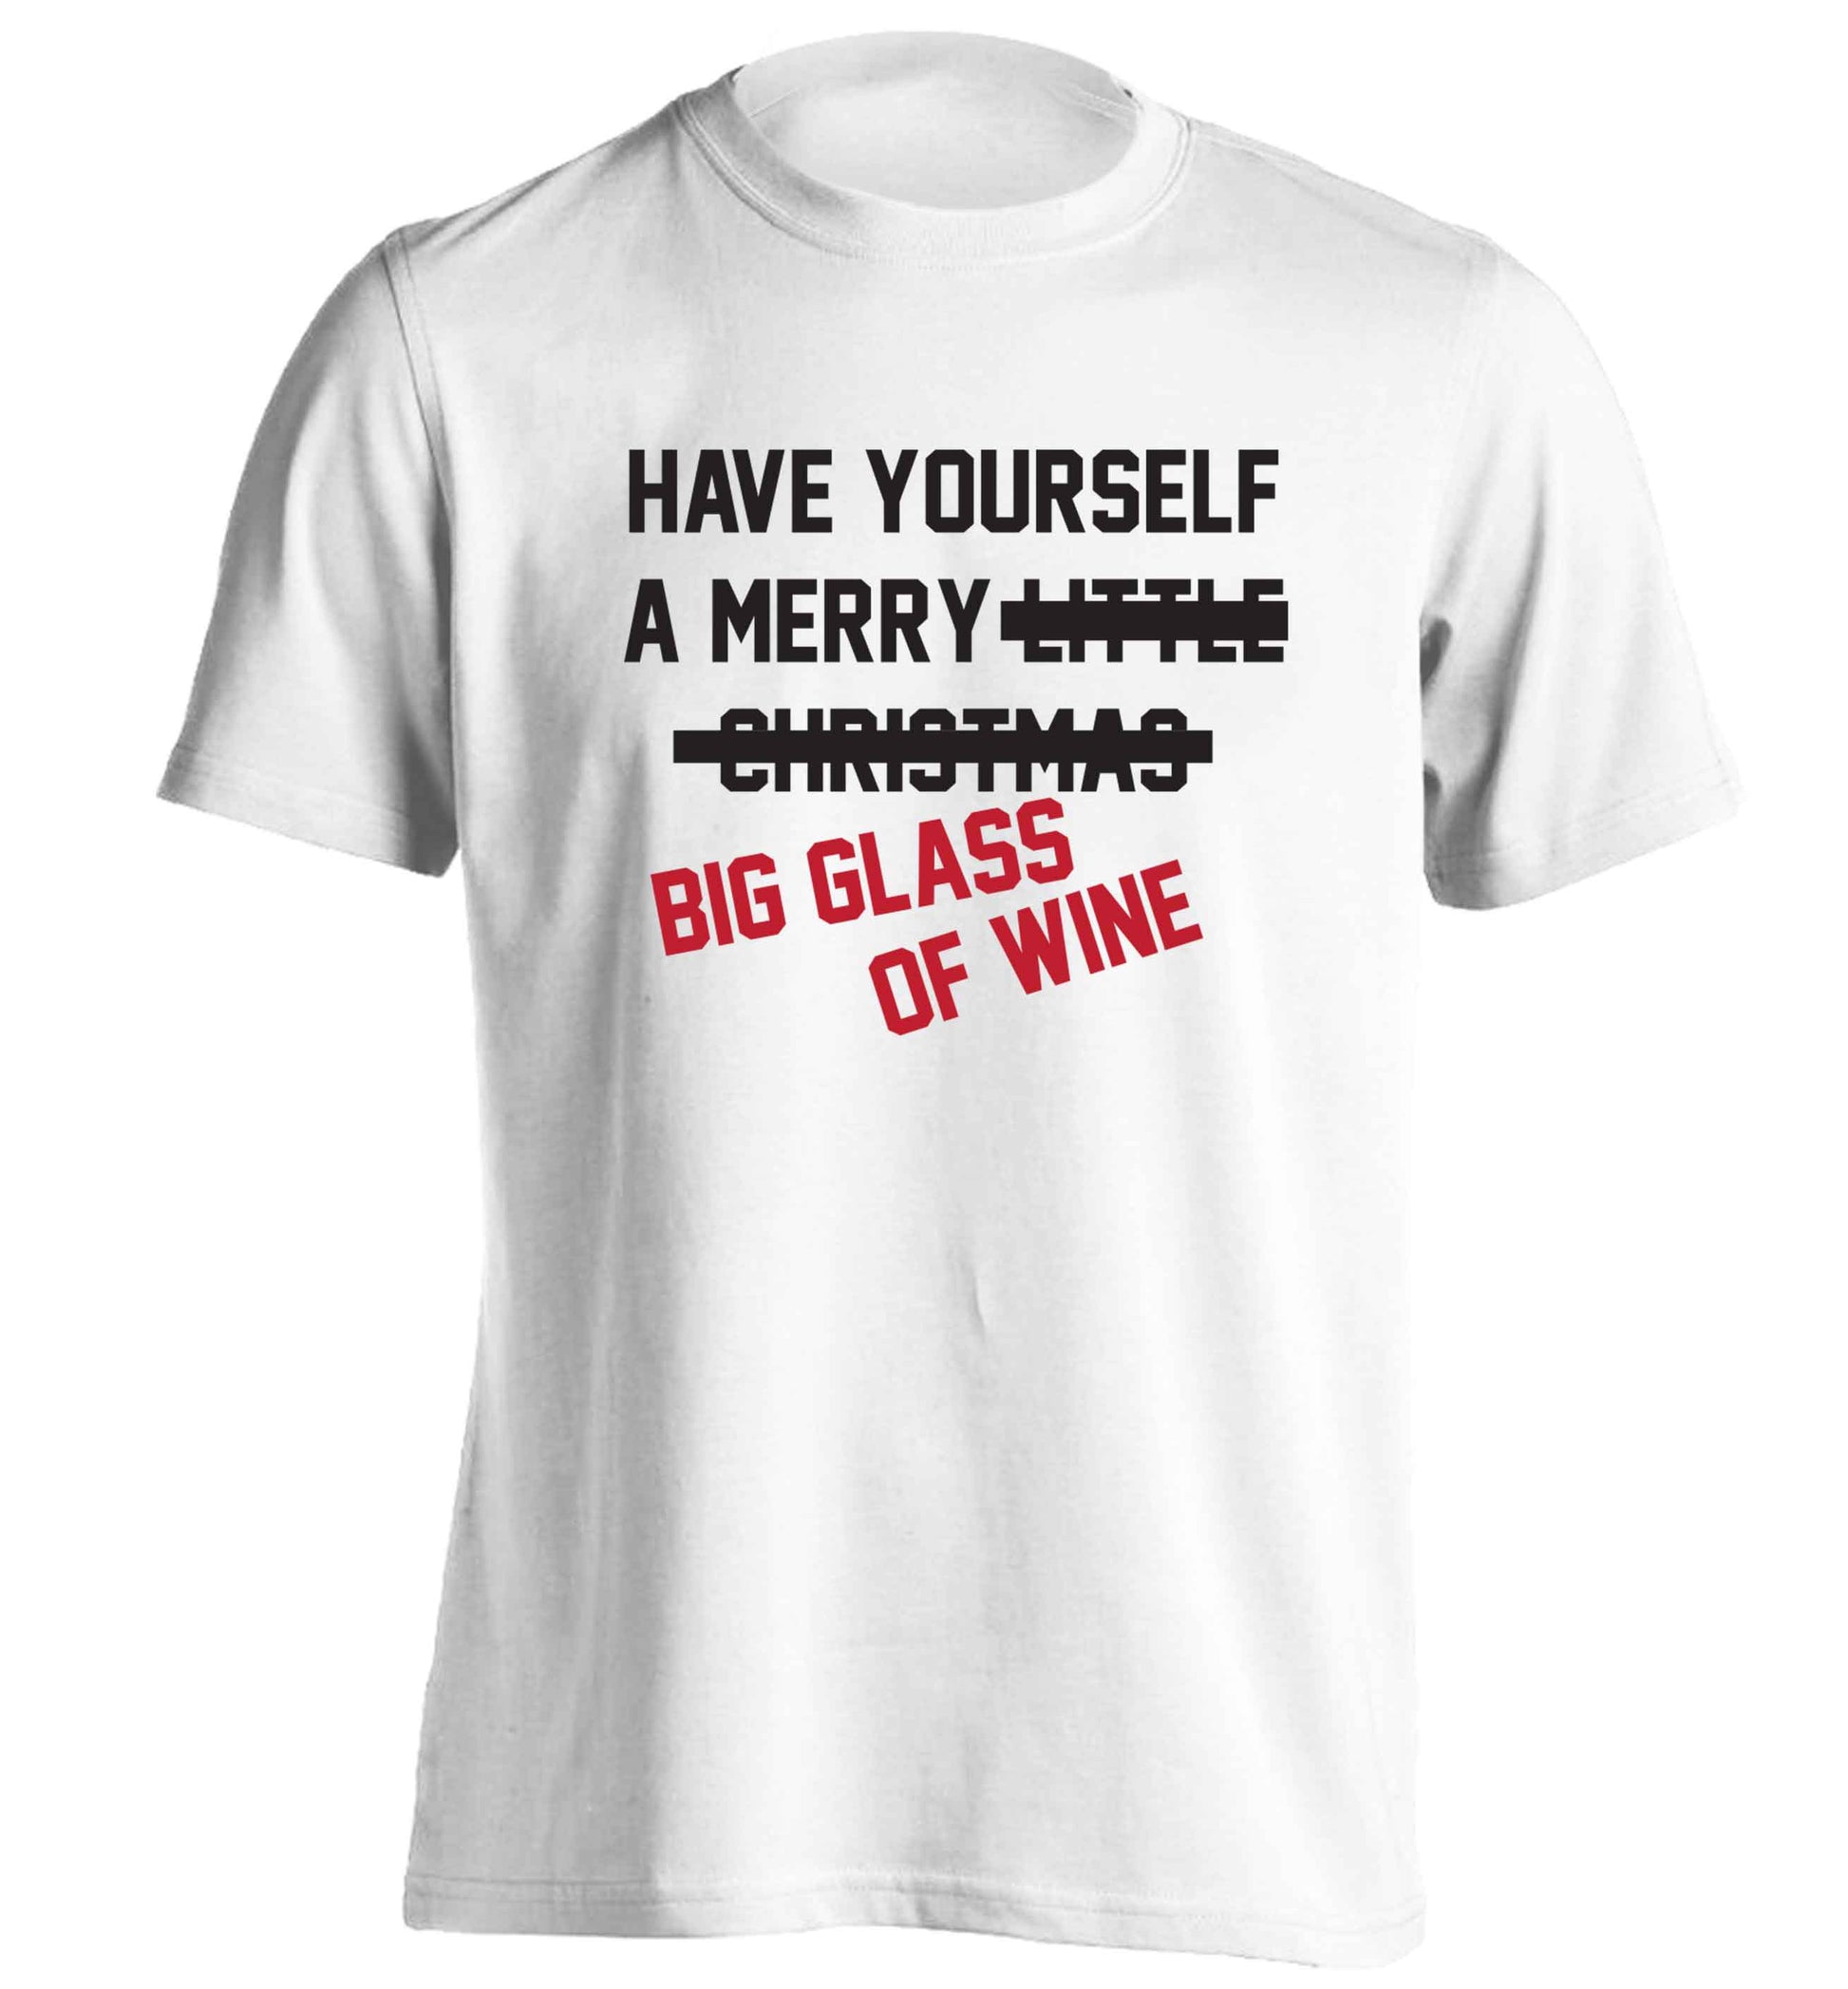 Have yourself a merry big glass of wine adults unisex white Tshirt 2XL